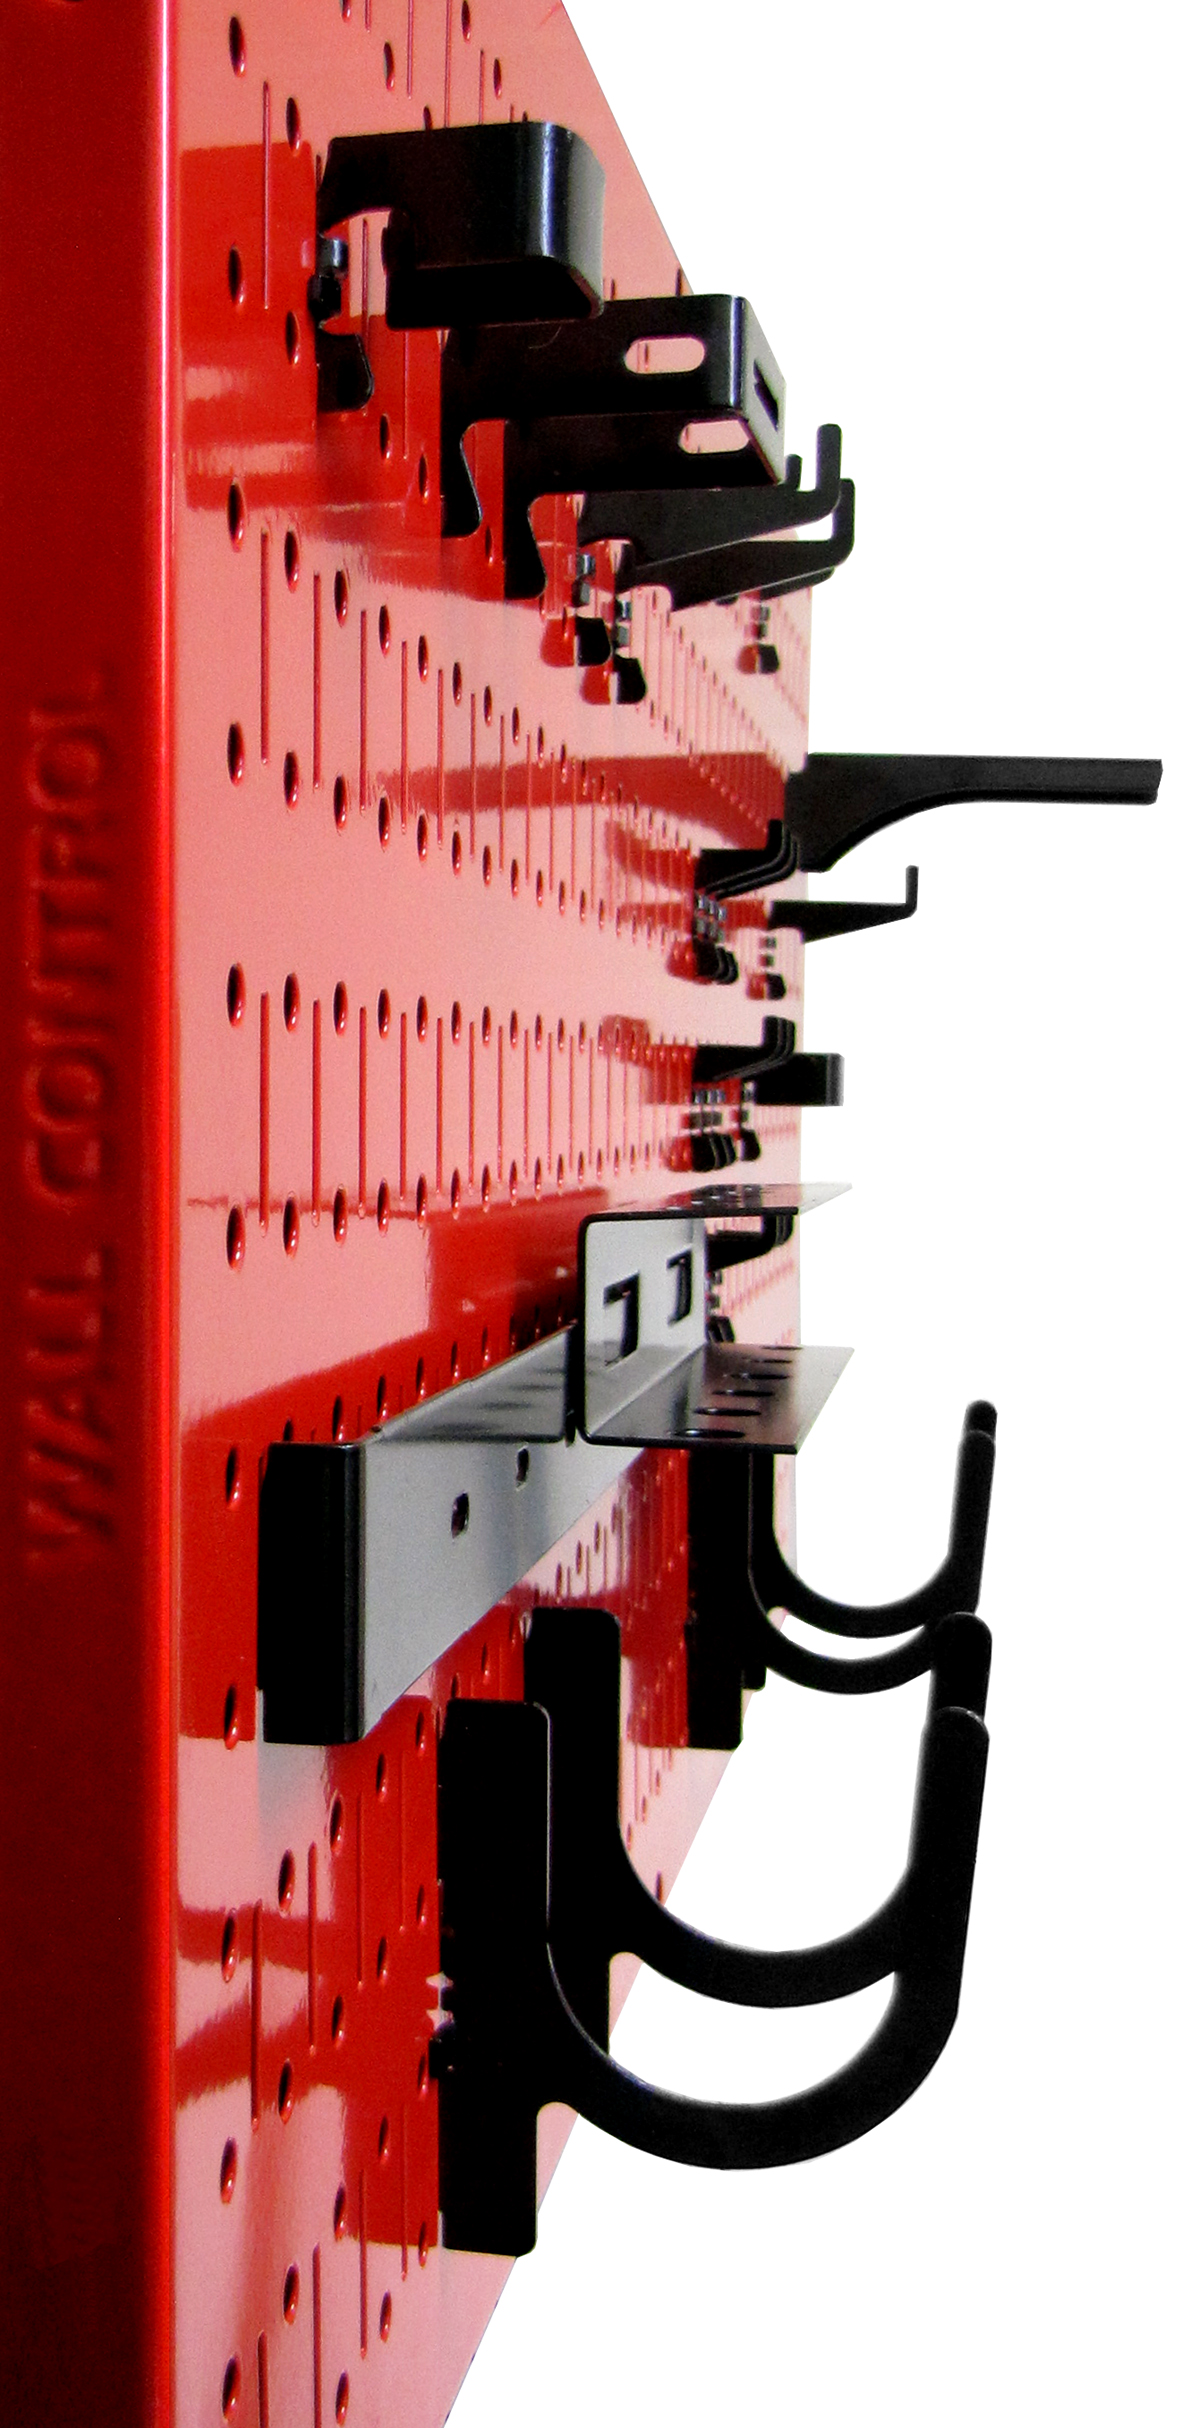 Wall Control Modular Pegboard Tool Organizer System - Wall-Mounted Metal Peg Board Tool Storage Unit for Pegboard Tiling (Red Pegboard) - image 3 of 9